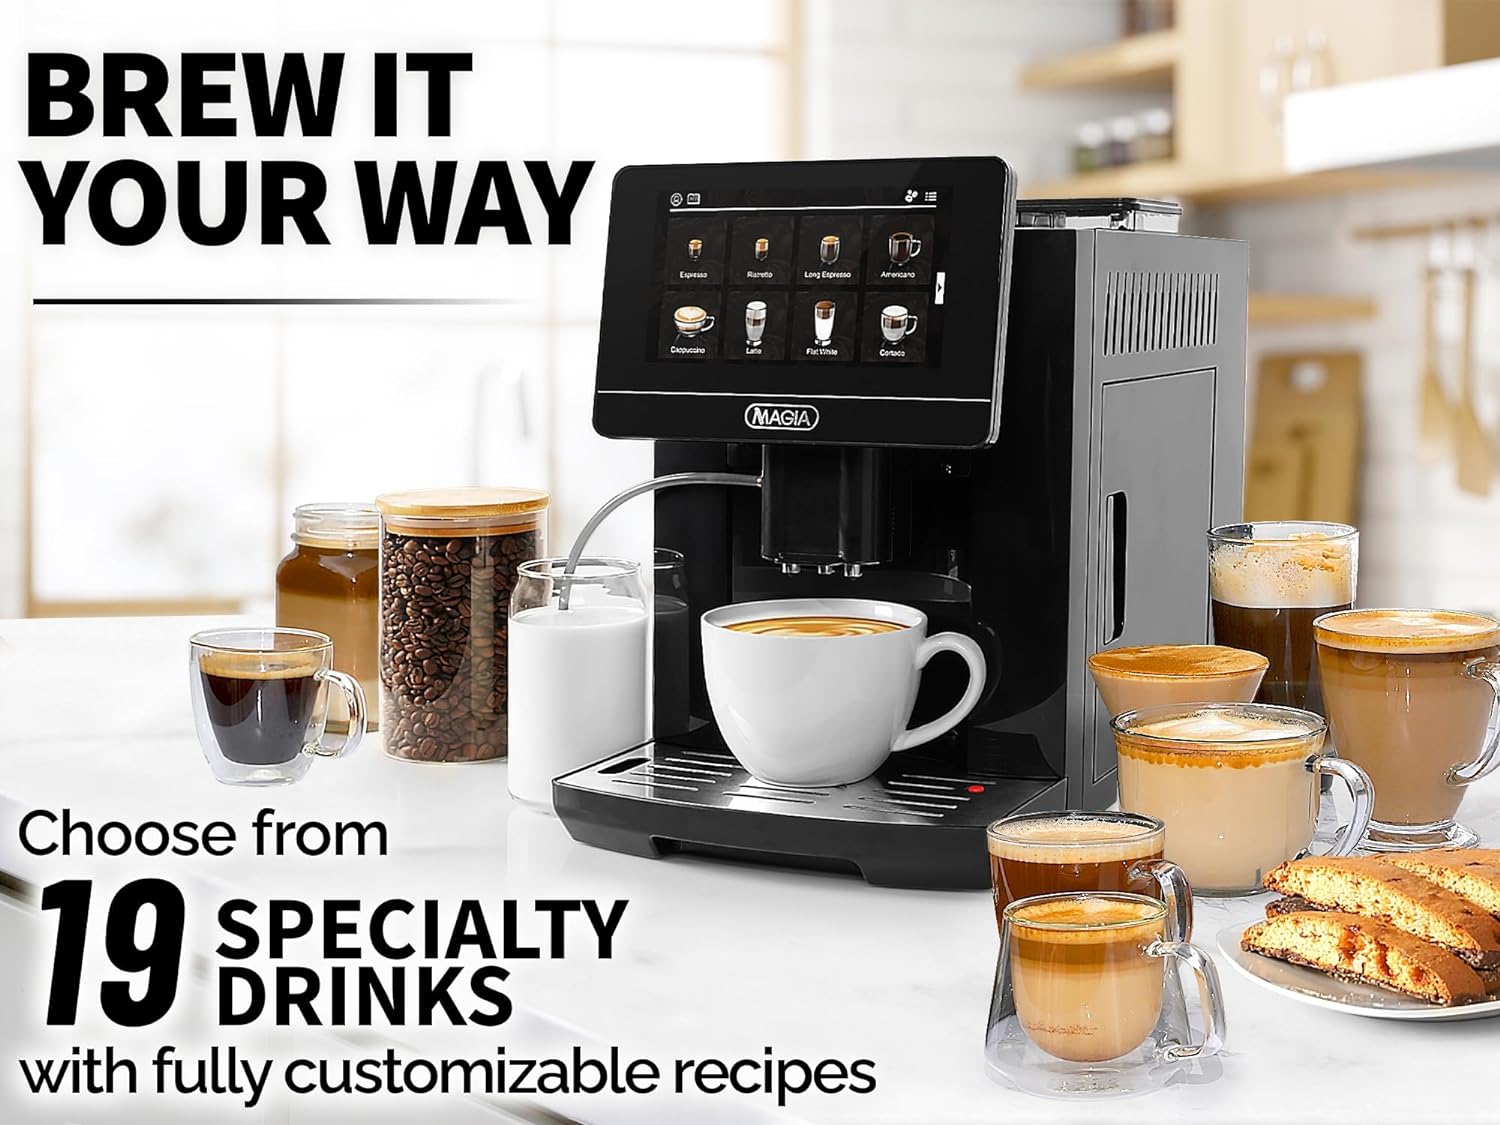 Specialty Tea & Coffee Makers